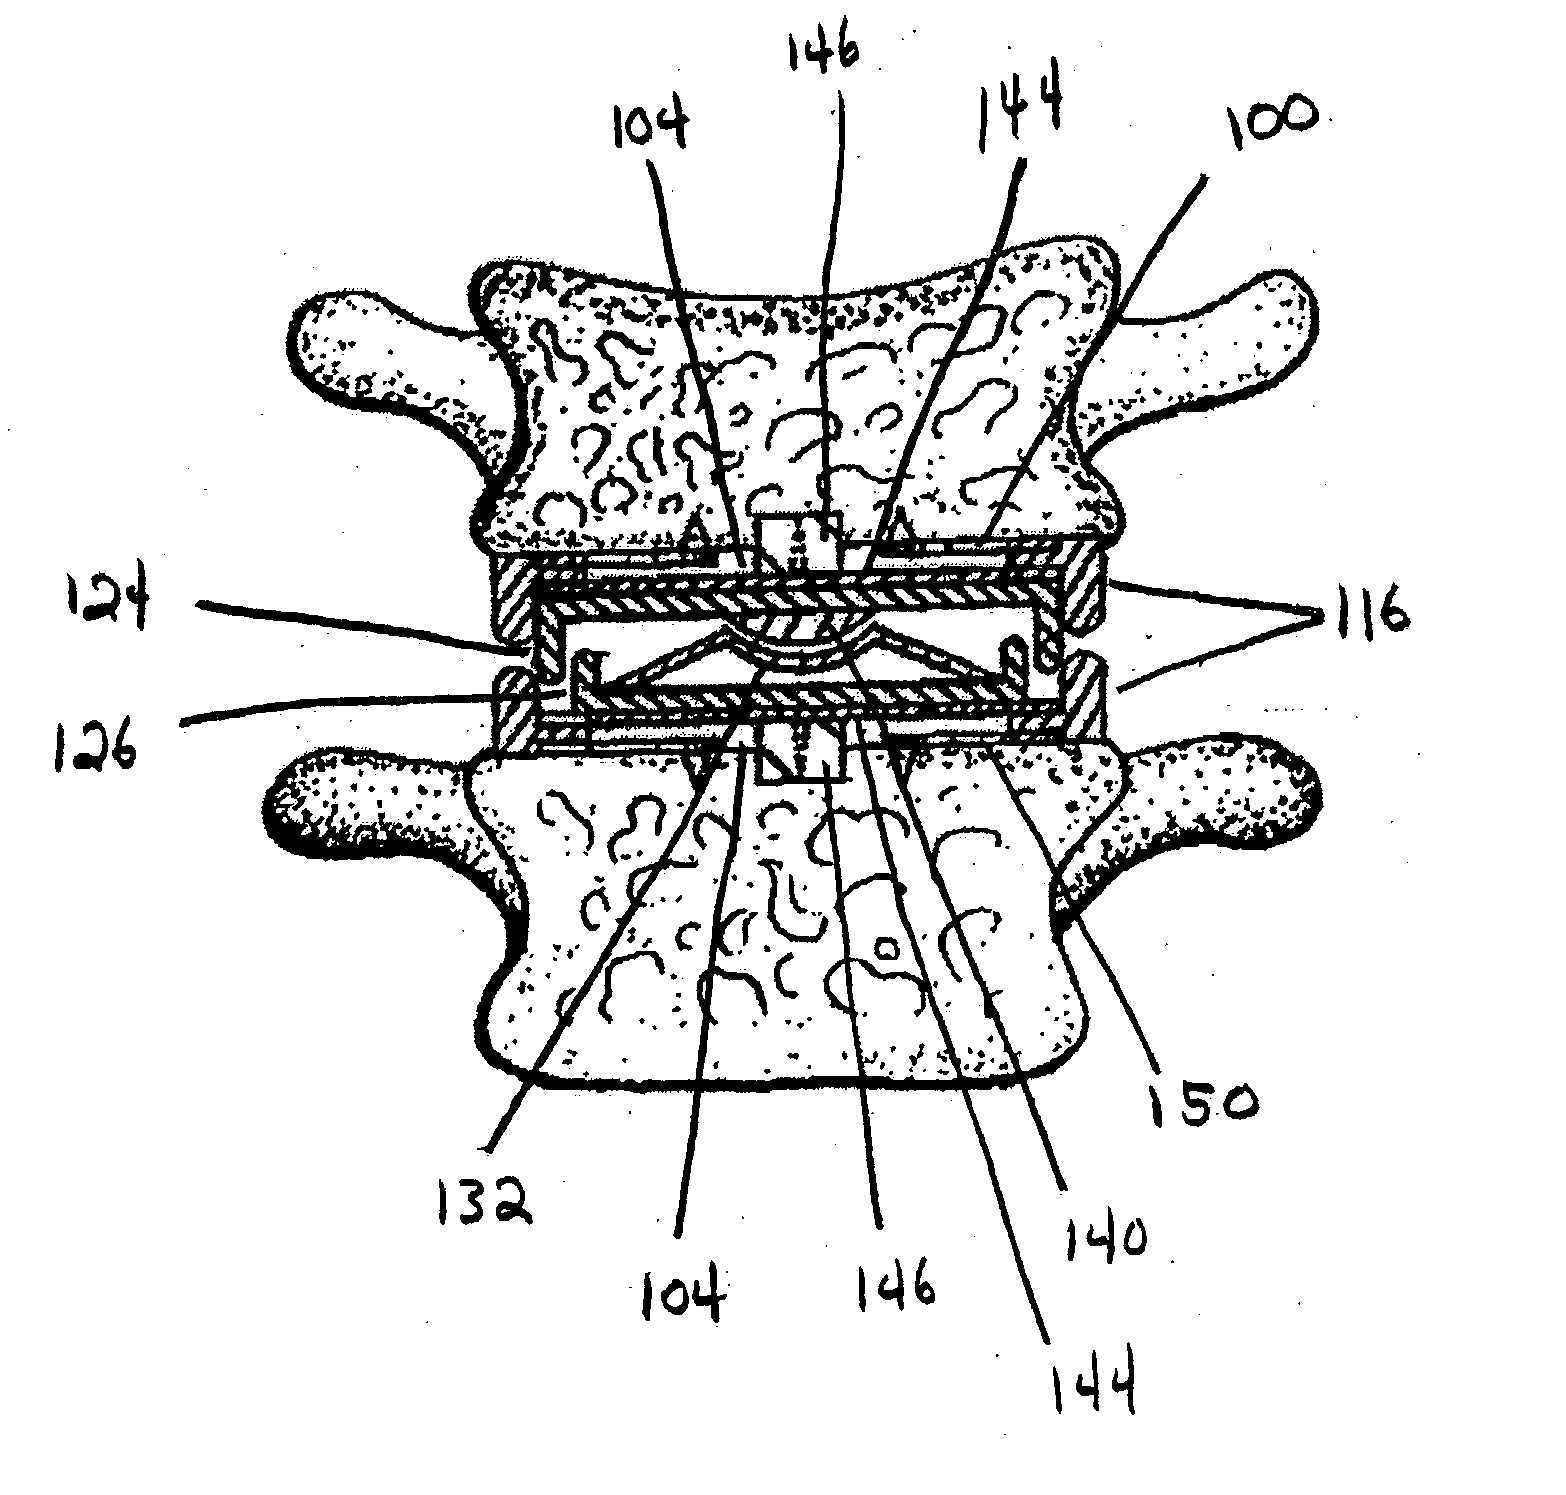 Spinal disc prosthesis system